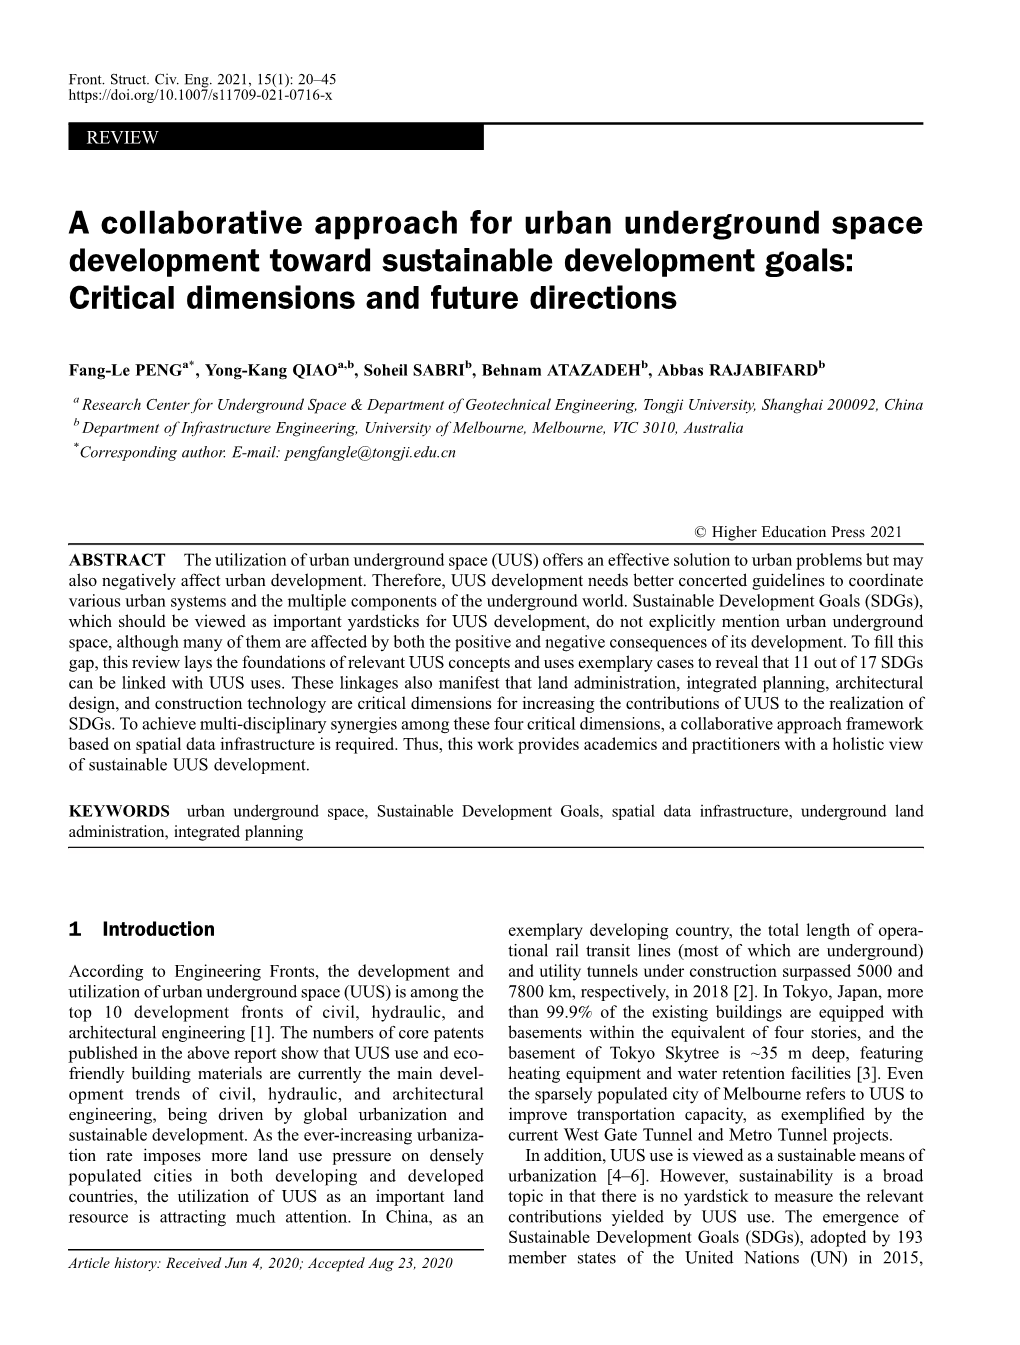 A Collaborative Approach for Urban Underground Space Development Toward Sustainable Development Goals: Critical Dimensions and Future Directions